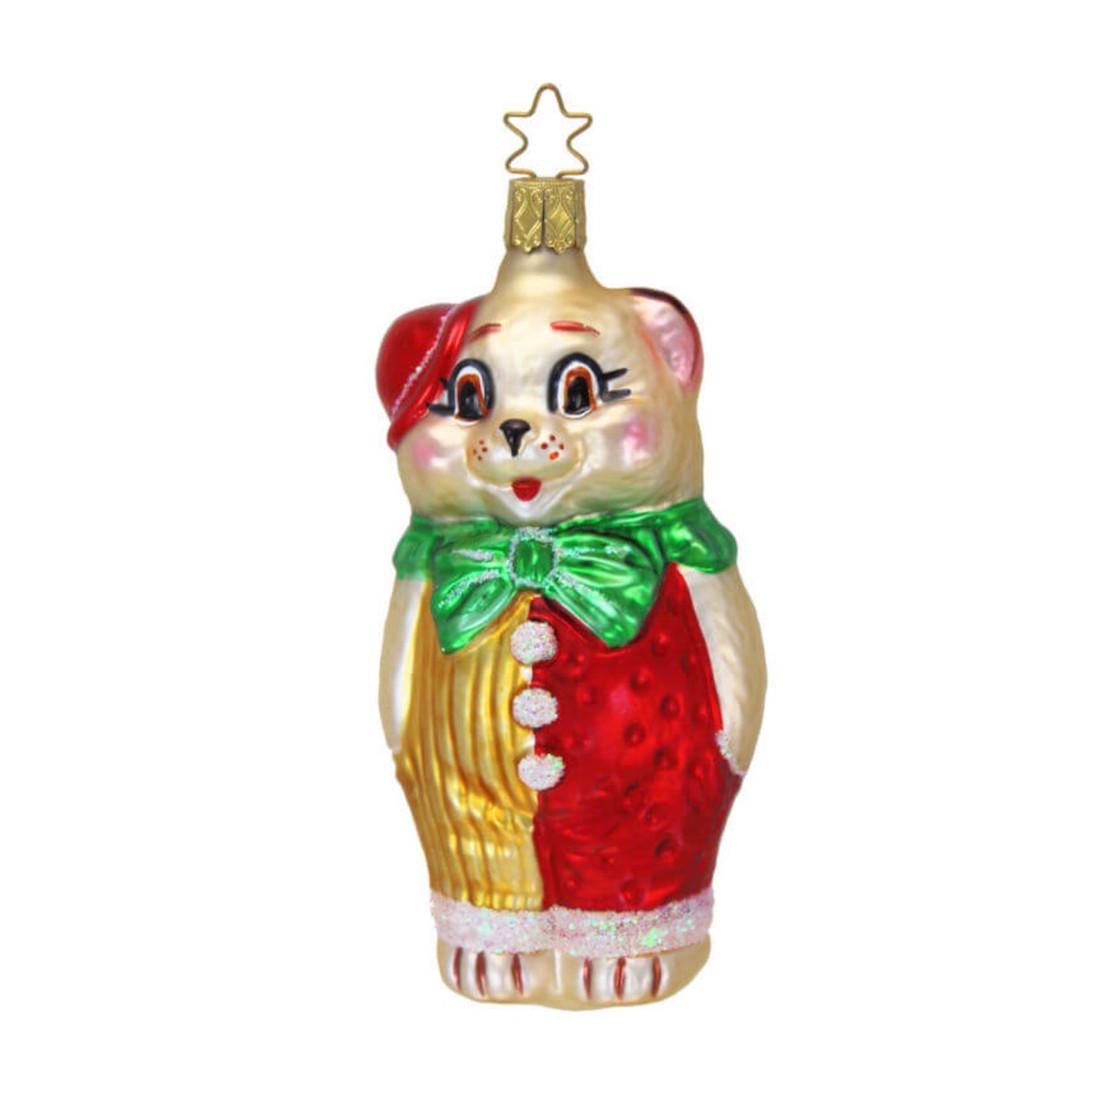 Bear in Clown Suit Ornament by Inge Glas of Germany